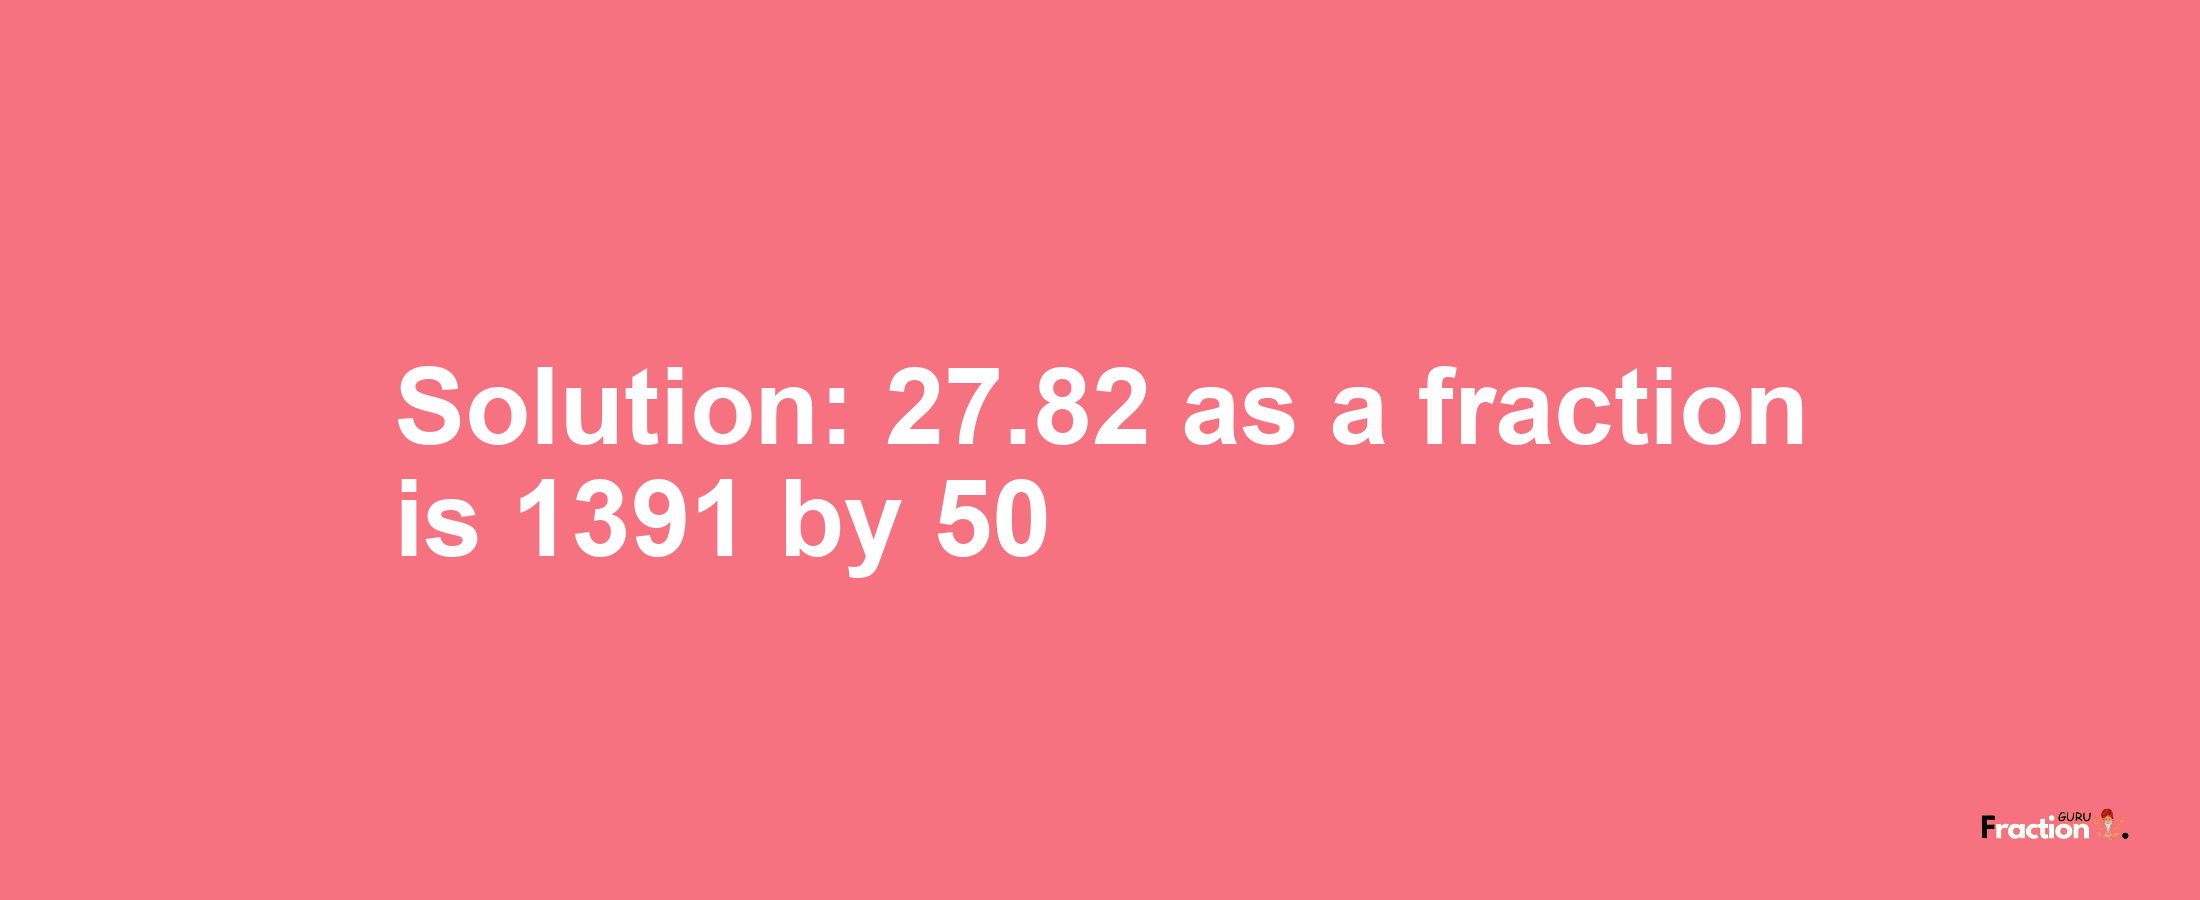 Solution:27.82 as a fraction is 1391/50